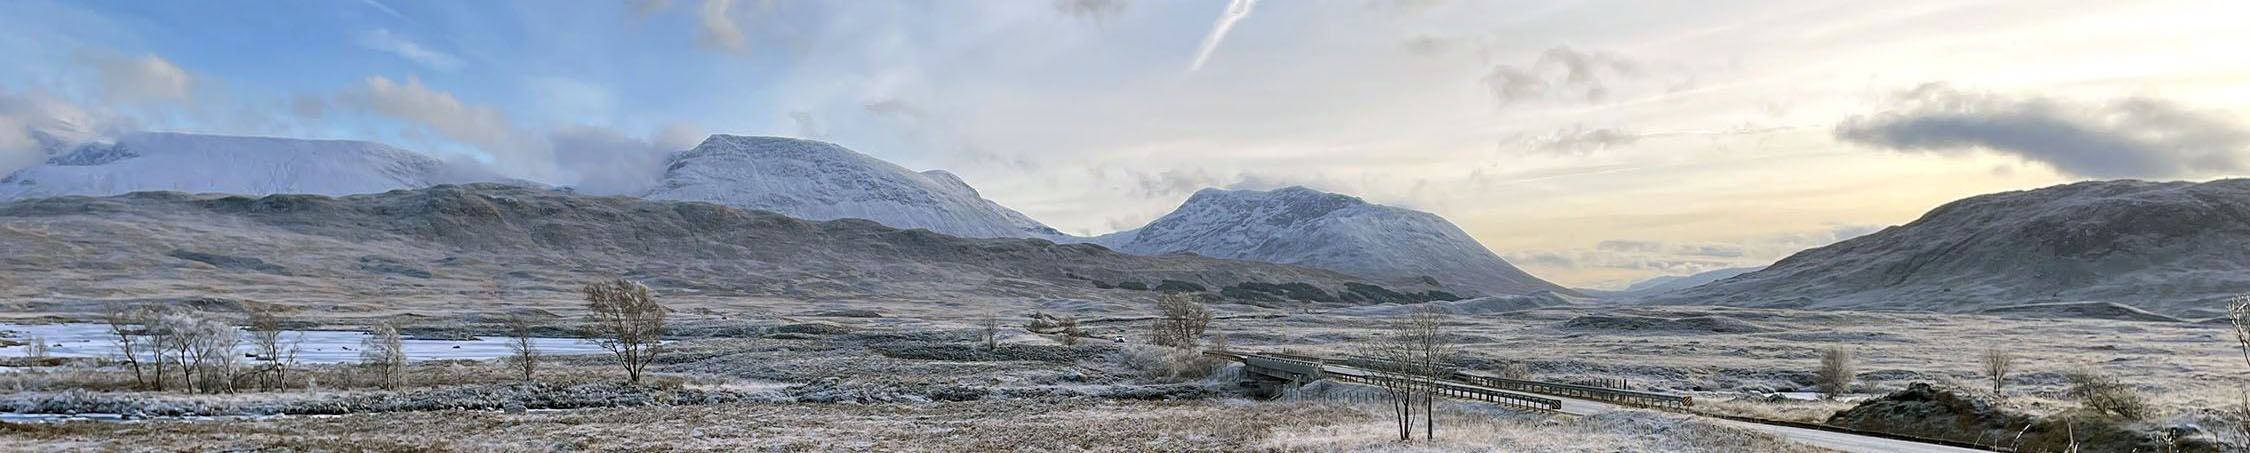 Its a frosty winter's morning with below freezing temperatures Rannoch Moor in shimmering in the morning sunlight.